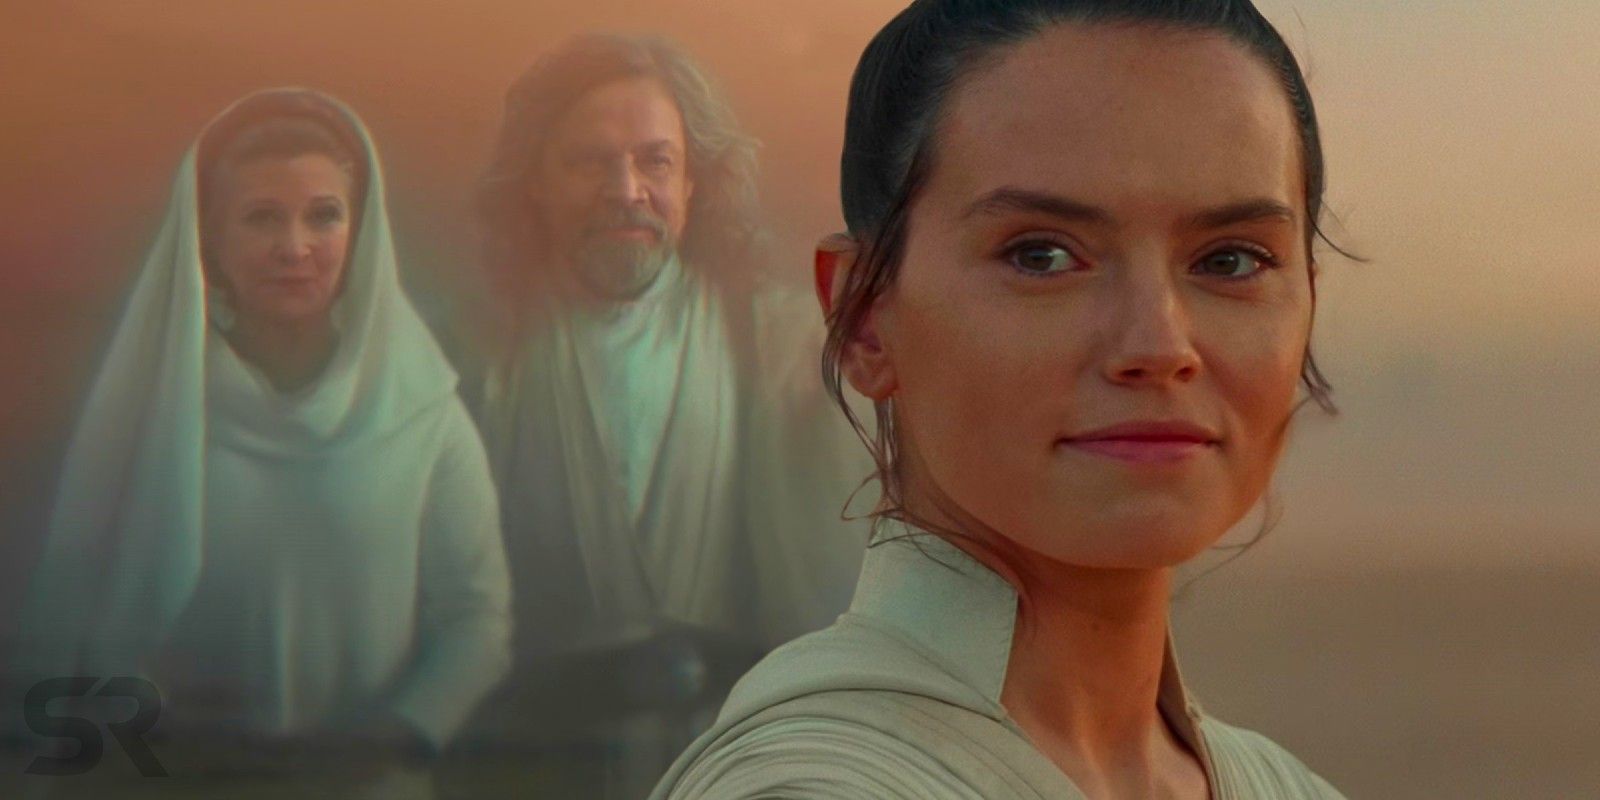 Star Wars Rise of Skywalker' Ending Explained: What Happened at the End?